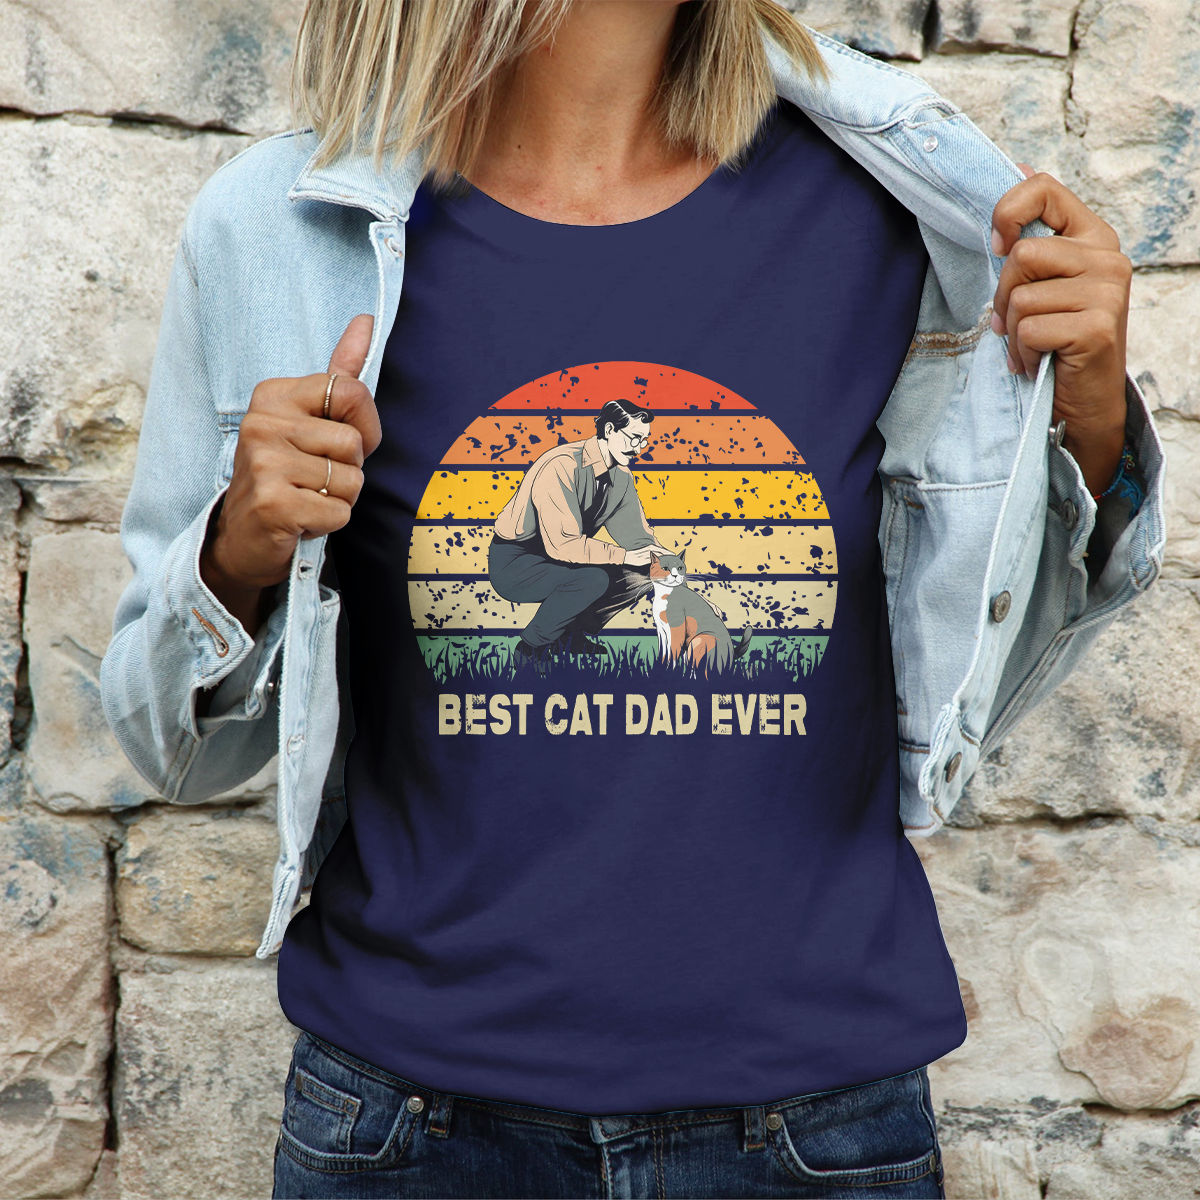 Father's Day 2024 - Best Cat Dad Ever Shirt, Father's Day Shirt, Love Cat Shirt, Family Matching Shirt 42914